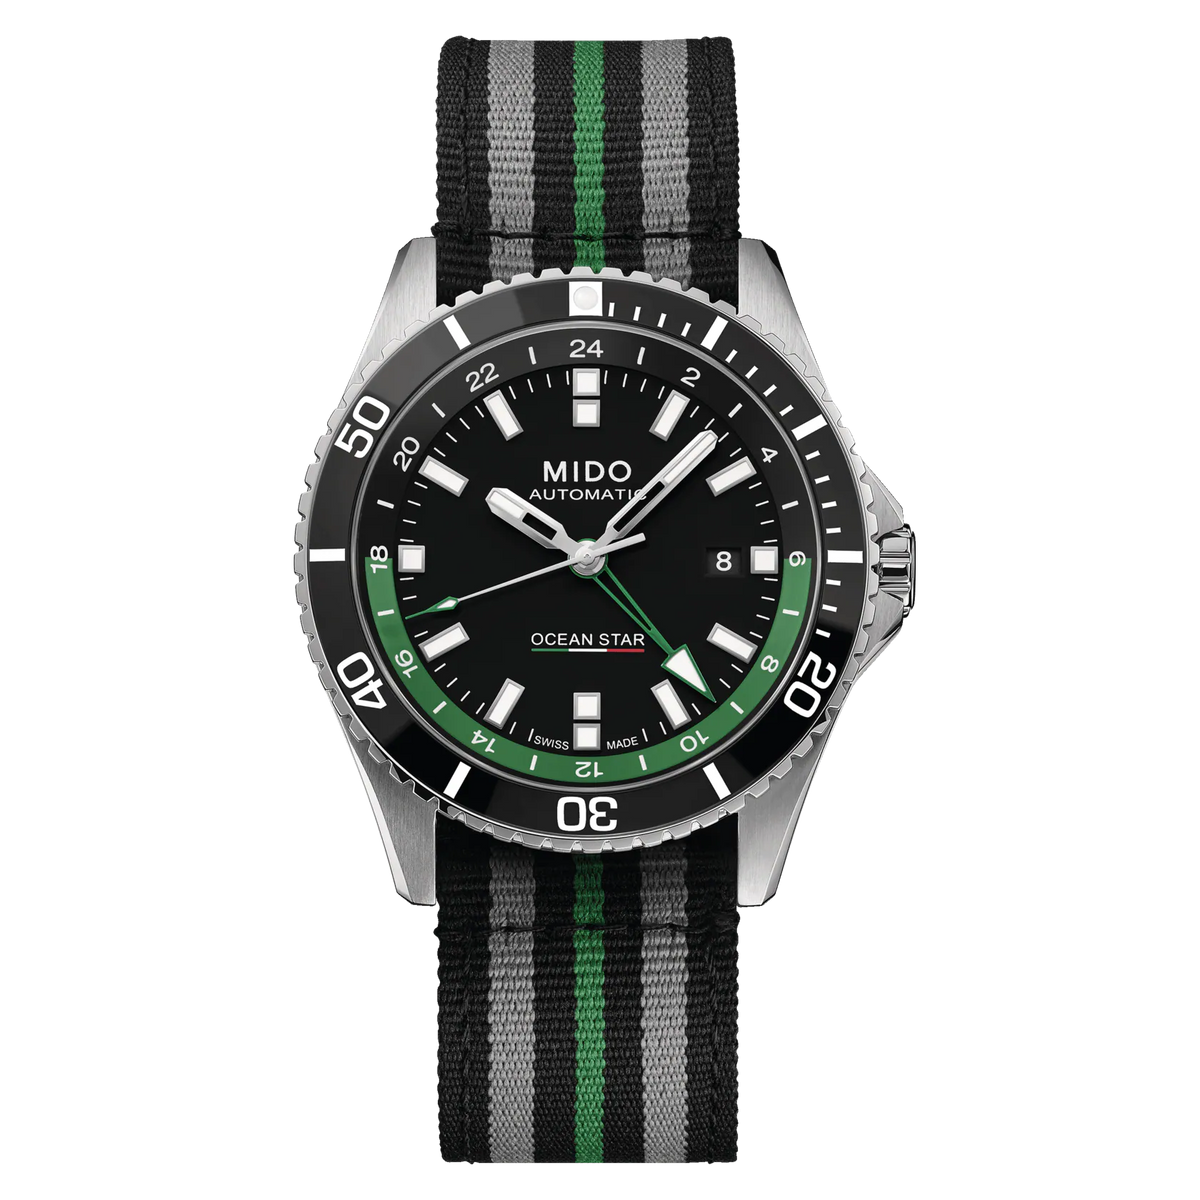 Mido Ocean Star GMT Limited Edition M026.629.11.051.03